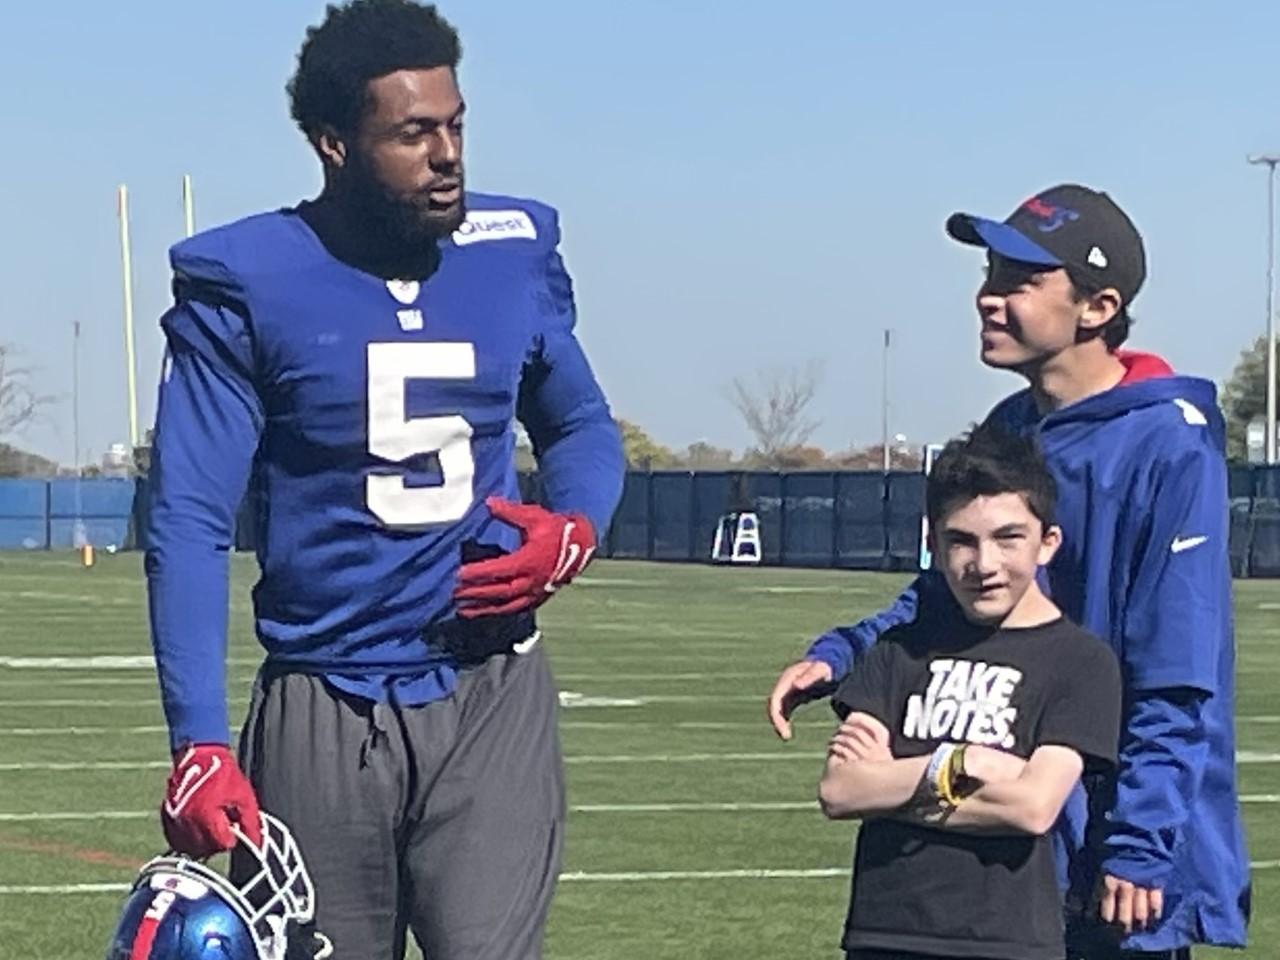 American football player standing next to two young fans